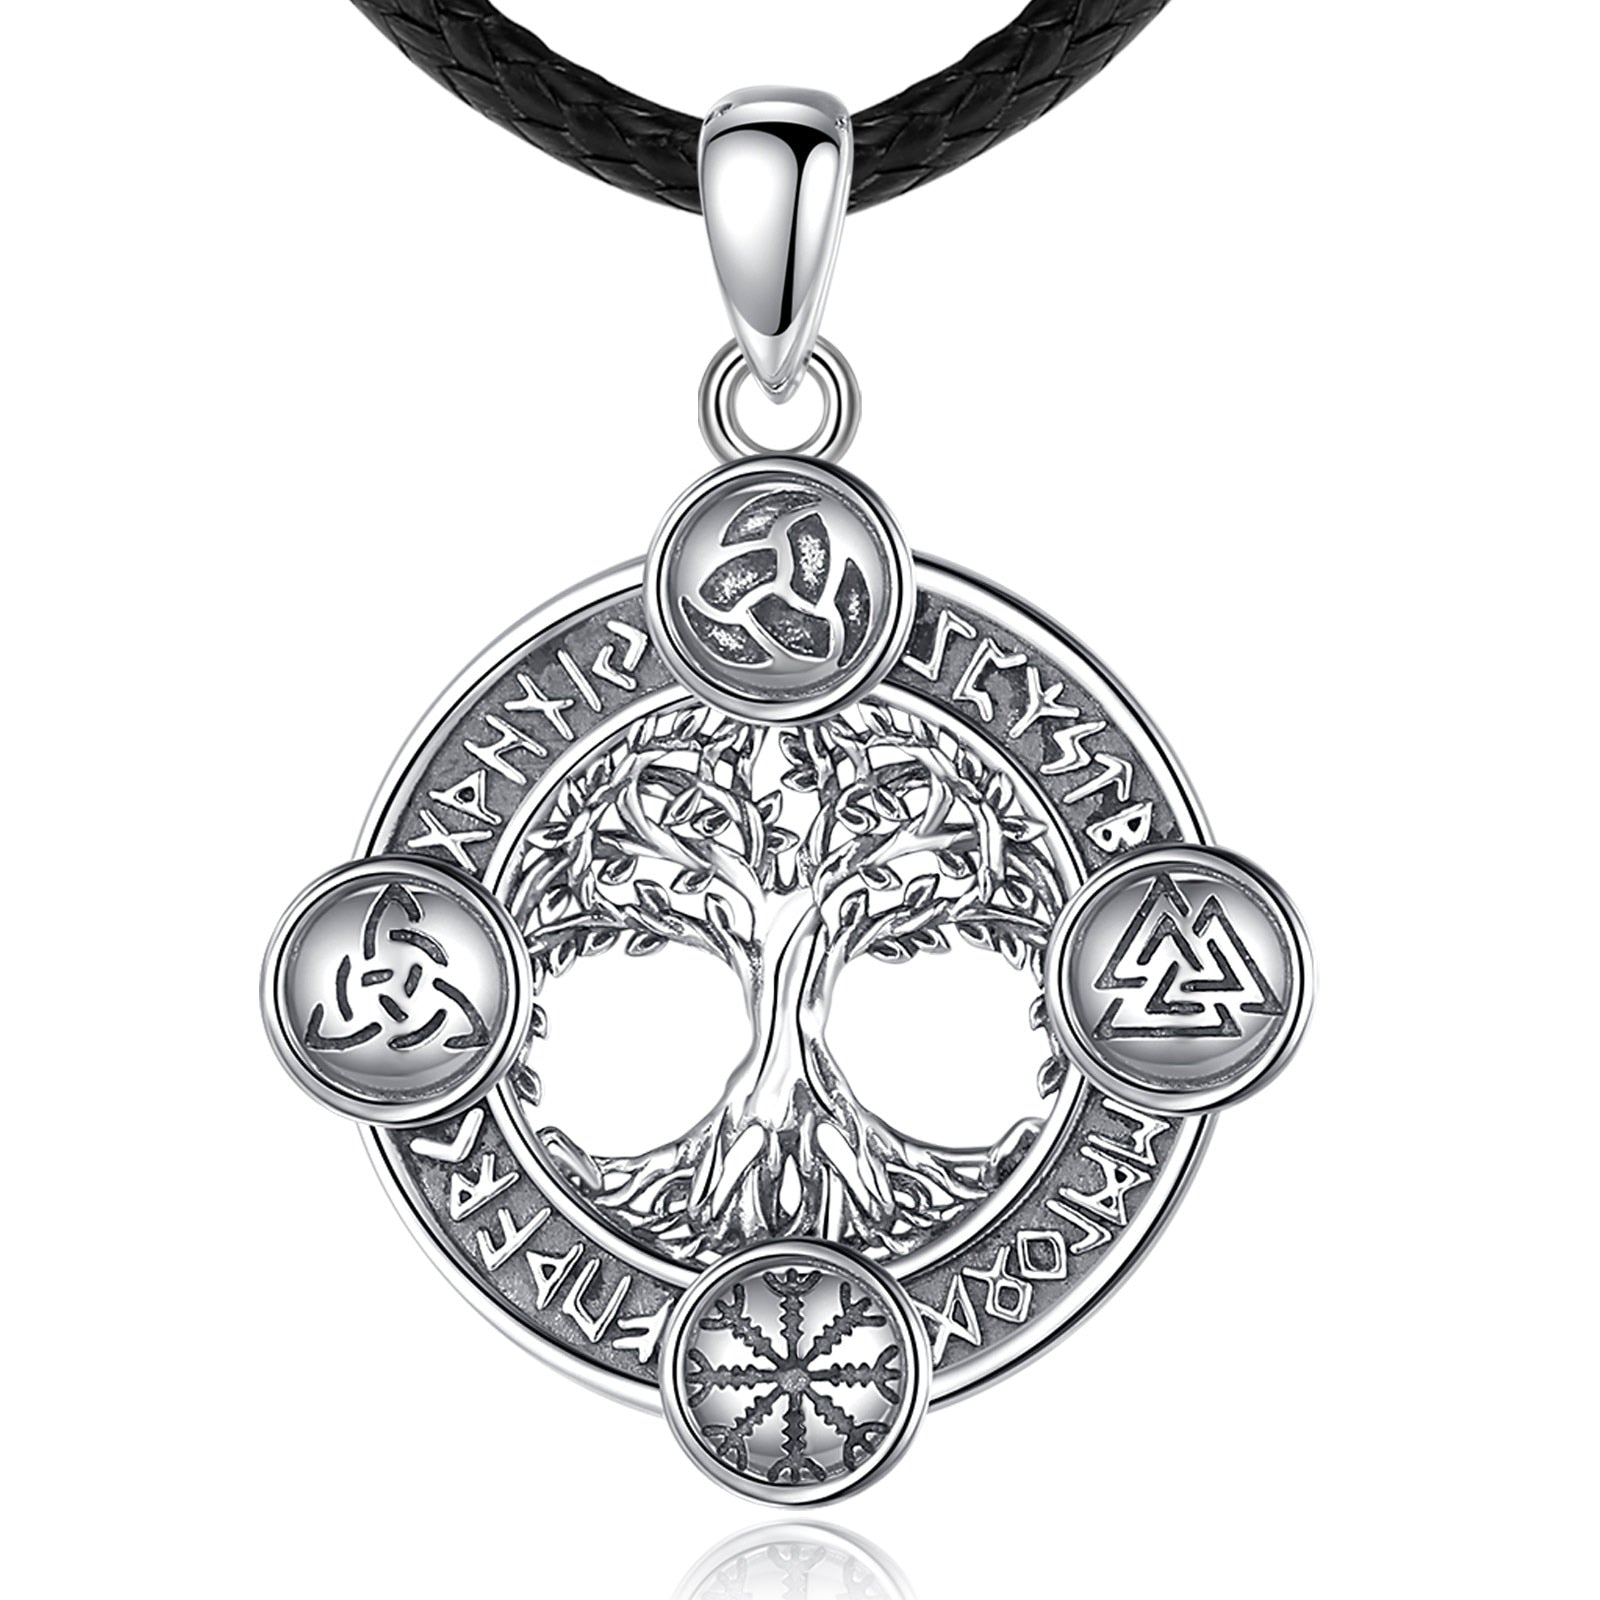 Yggdrasil, The Tree of Life With Runes Necklace in 925 Sterling Silver